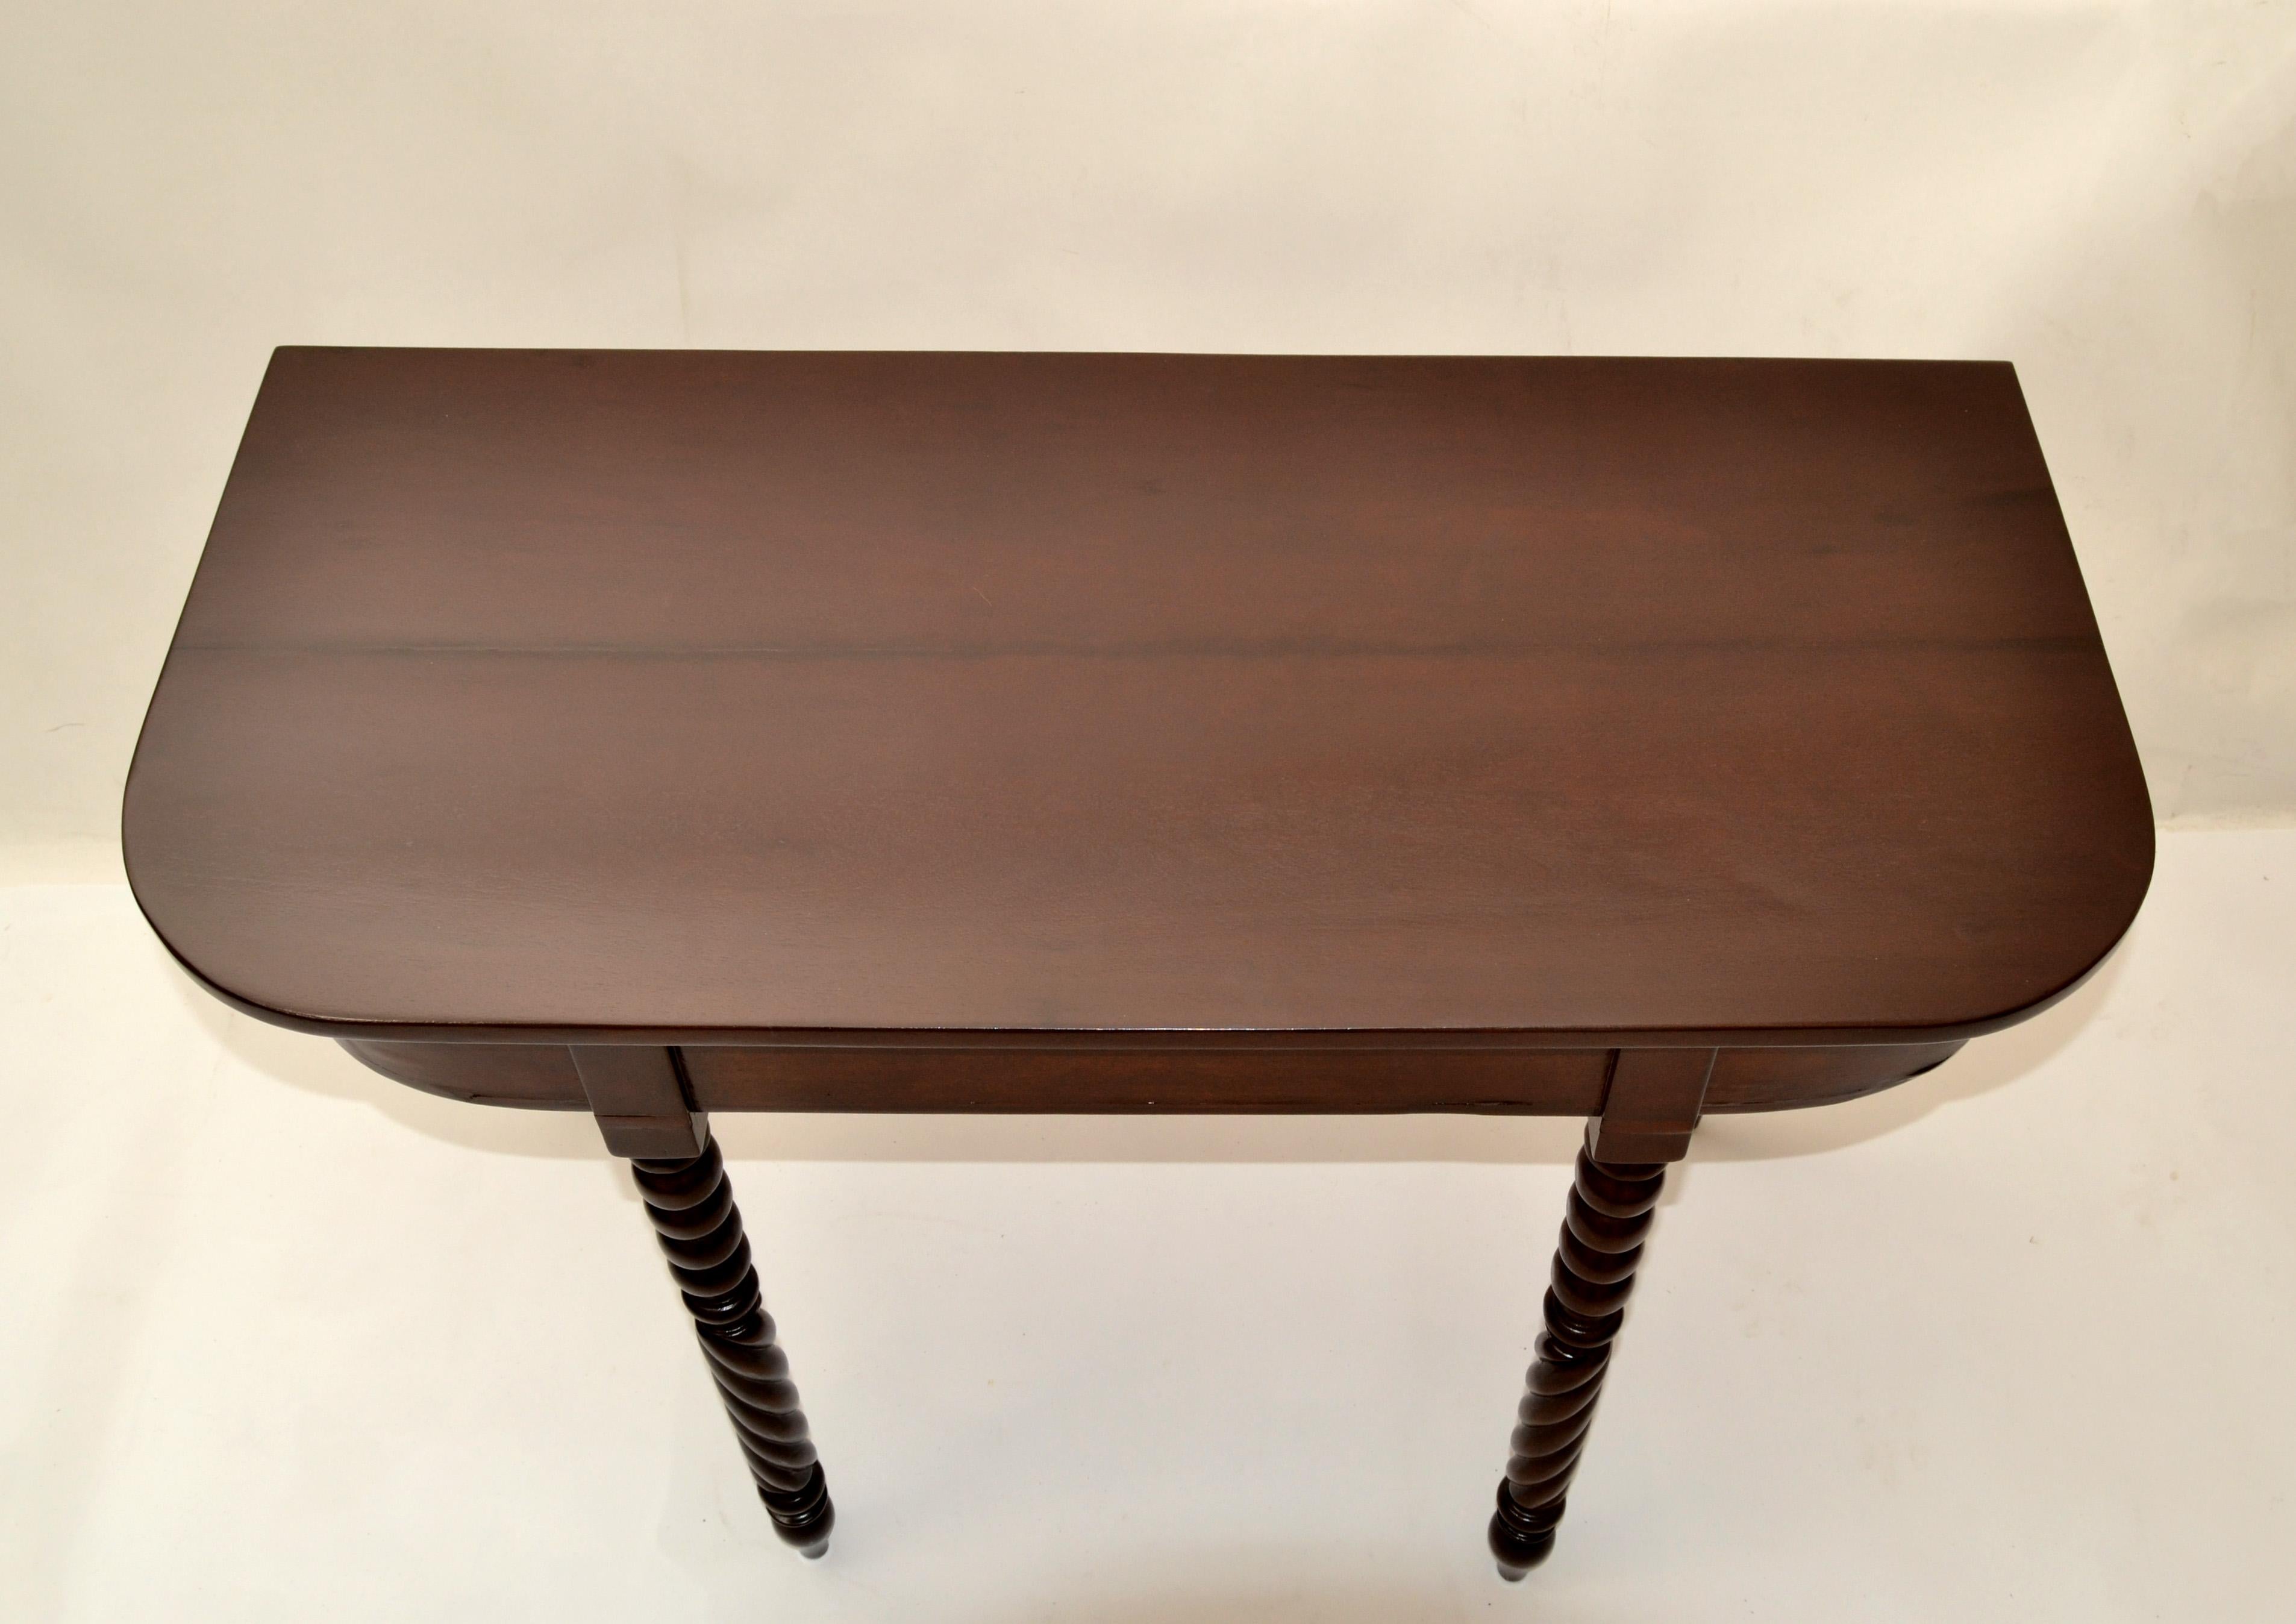 Hand-Crafted 19th Century Brown Finish Console or Hallway Table Vanity Turned Tapered Legs For Sale